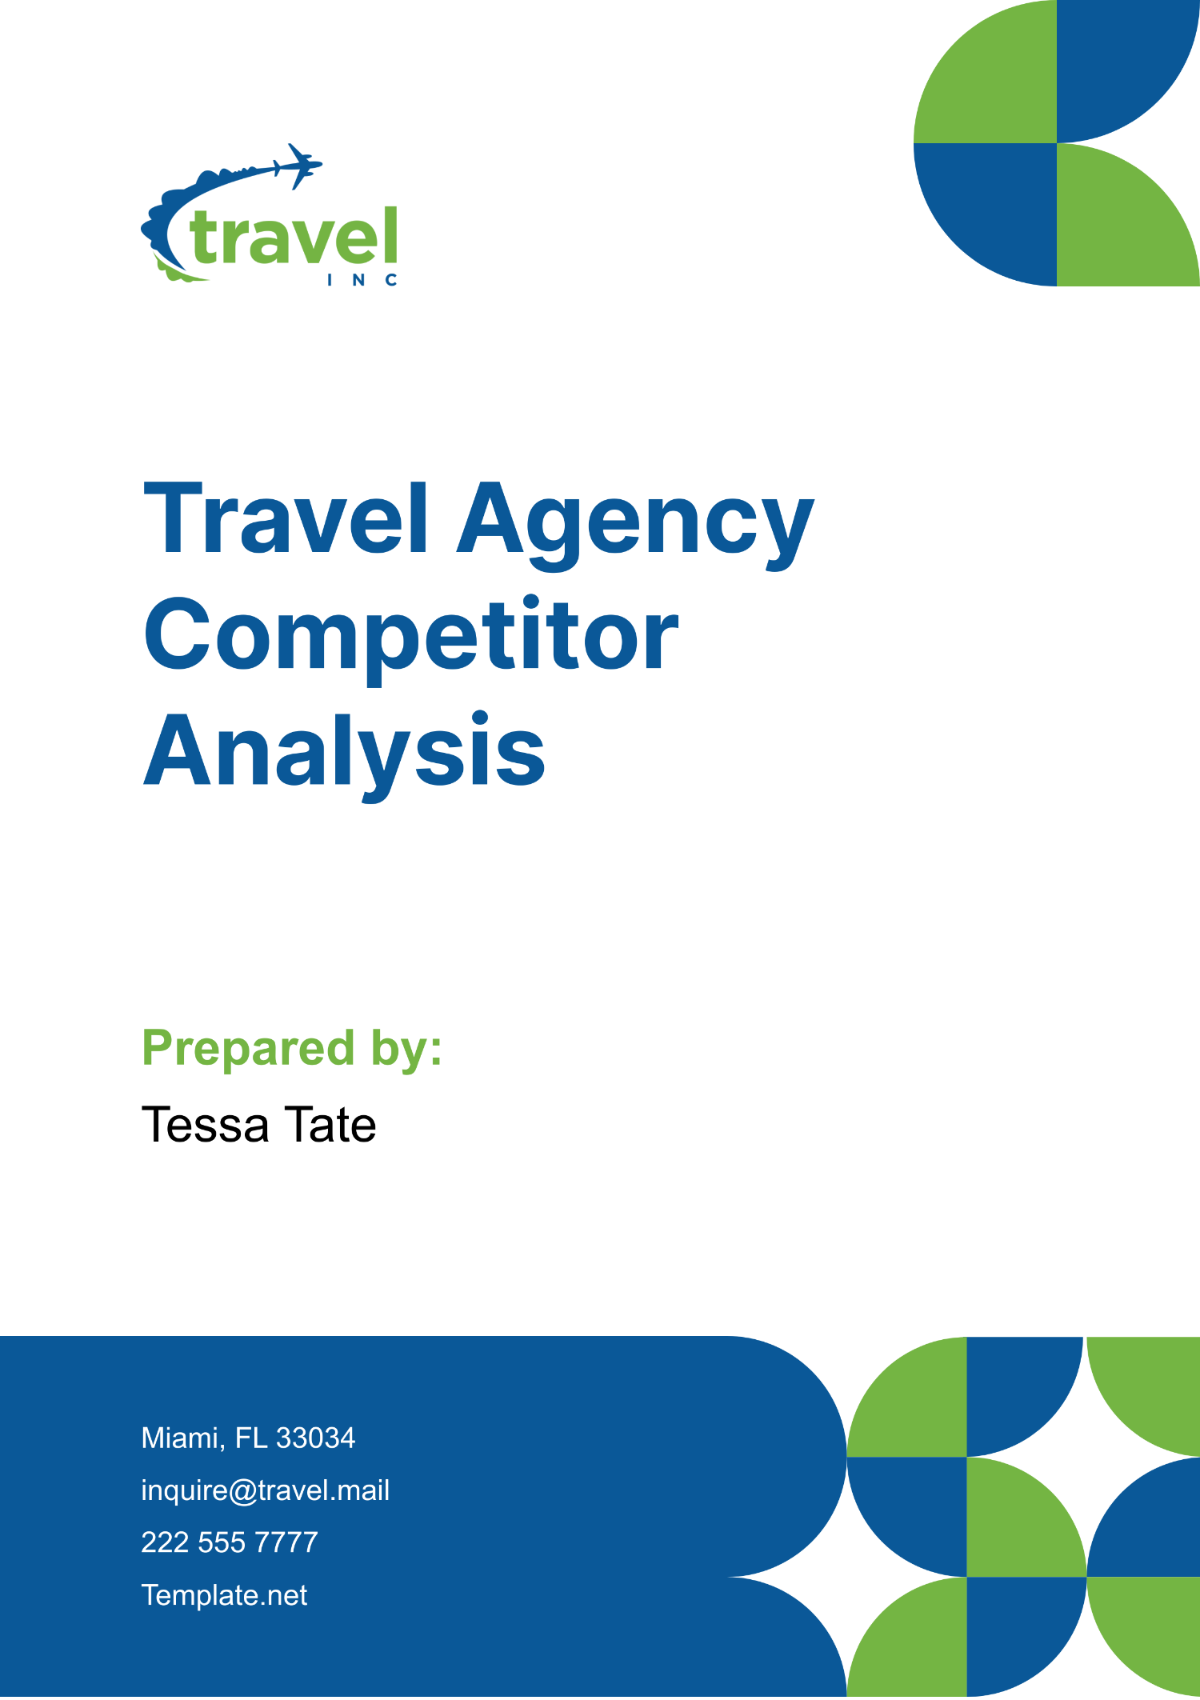 Travel Agency Competitor Analysis Template